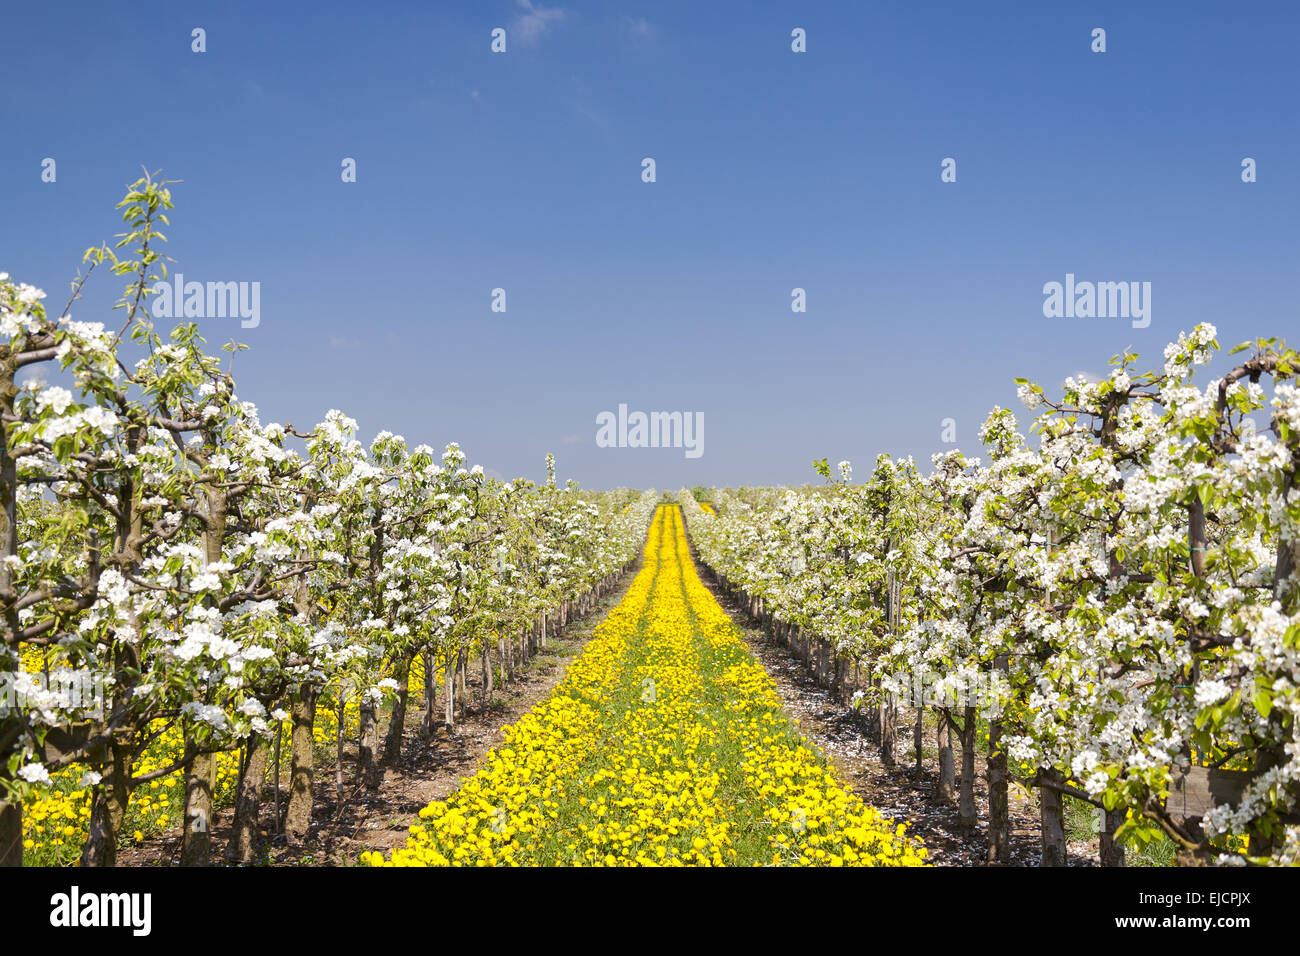 Blossoming fruit trees Stock Photo